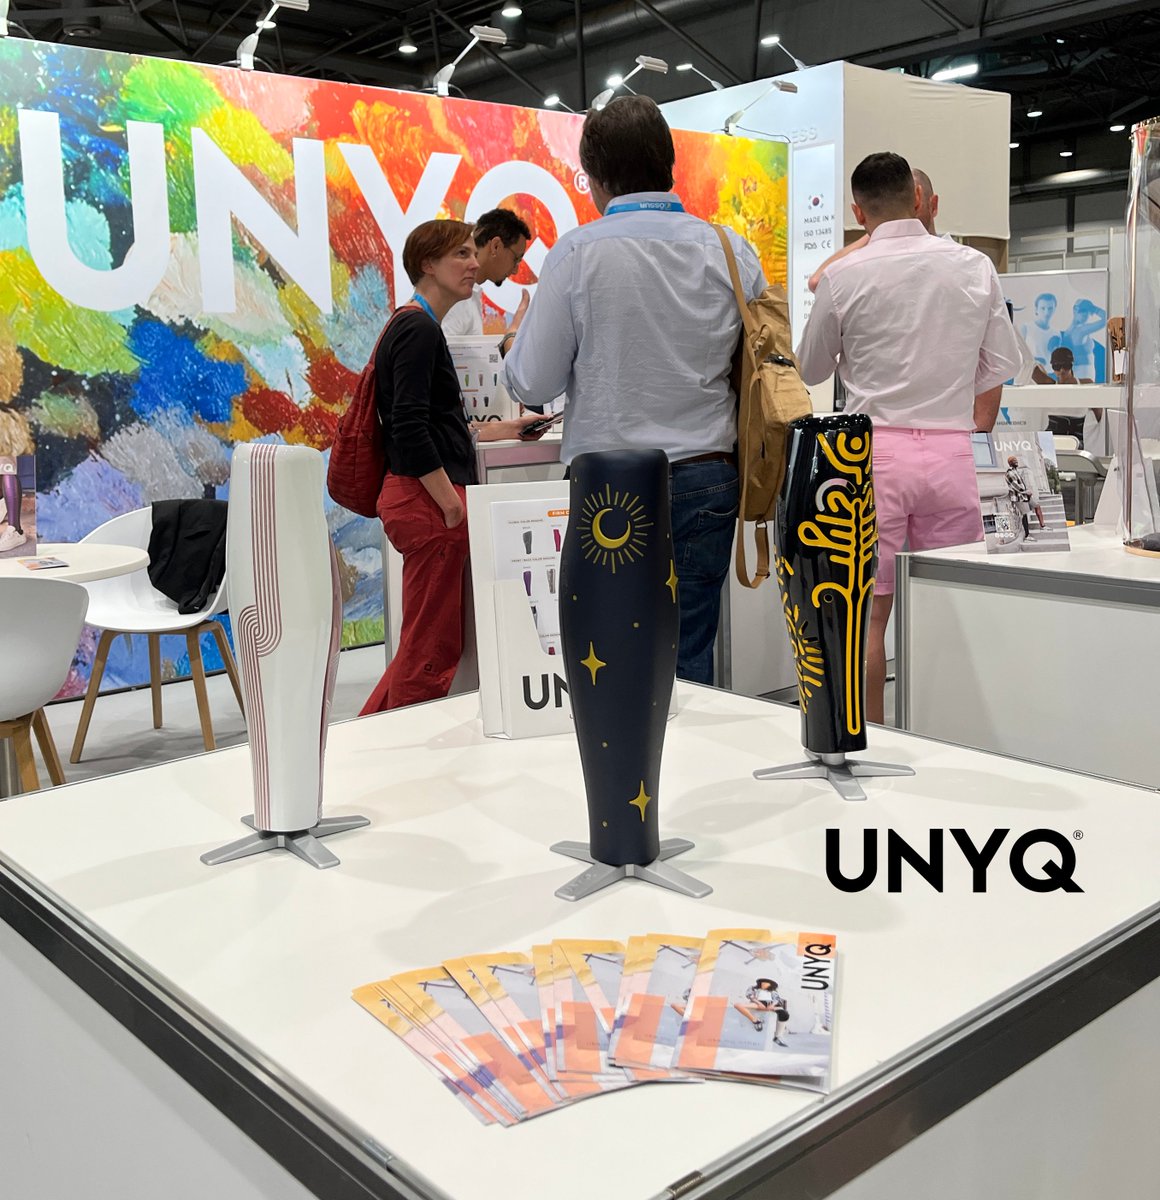 📣📣 Don't forget to visit us at OTW in Hall5 Stand D51 for the latest in custom covers ‼

Yoku, Perseus and Inuk are waiting for you 🥰

#OTW #unyq #amputee #cover #WeAreUNYQ #UNYQWayOfLife #3Dprinting